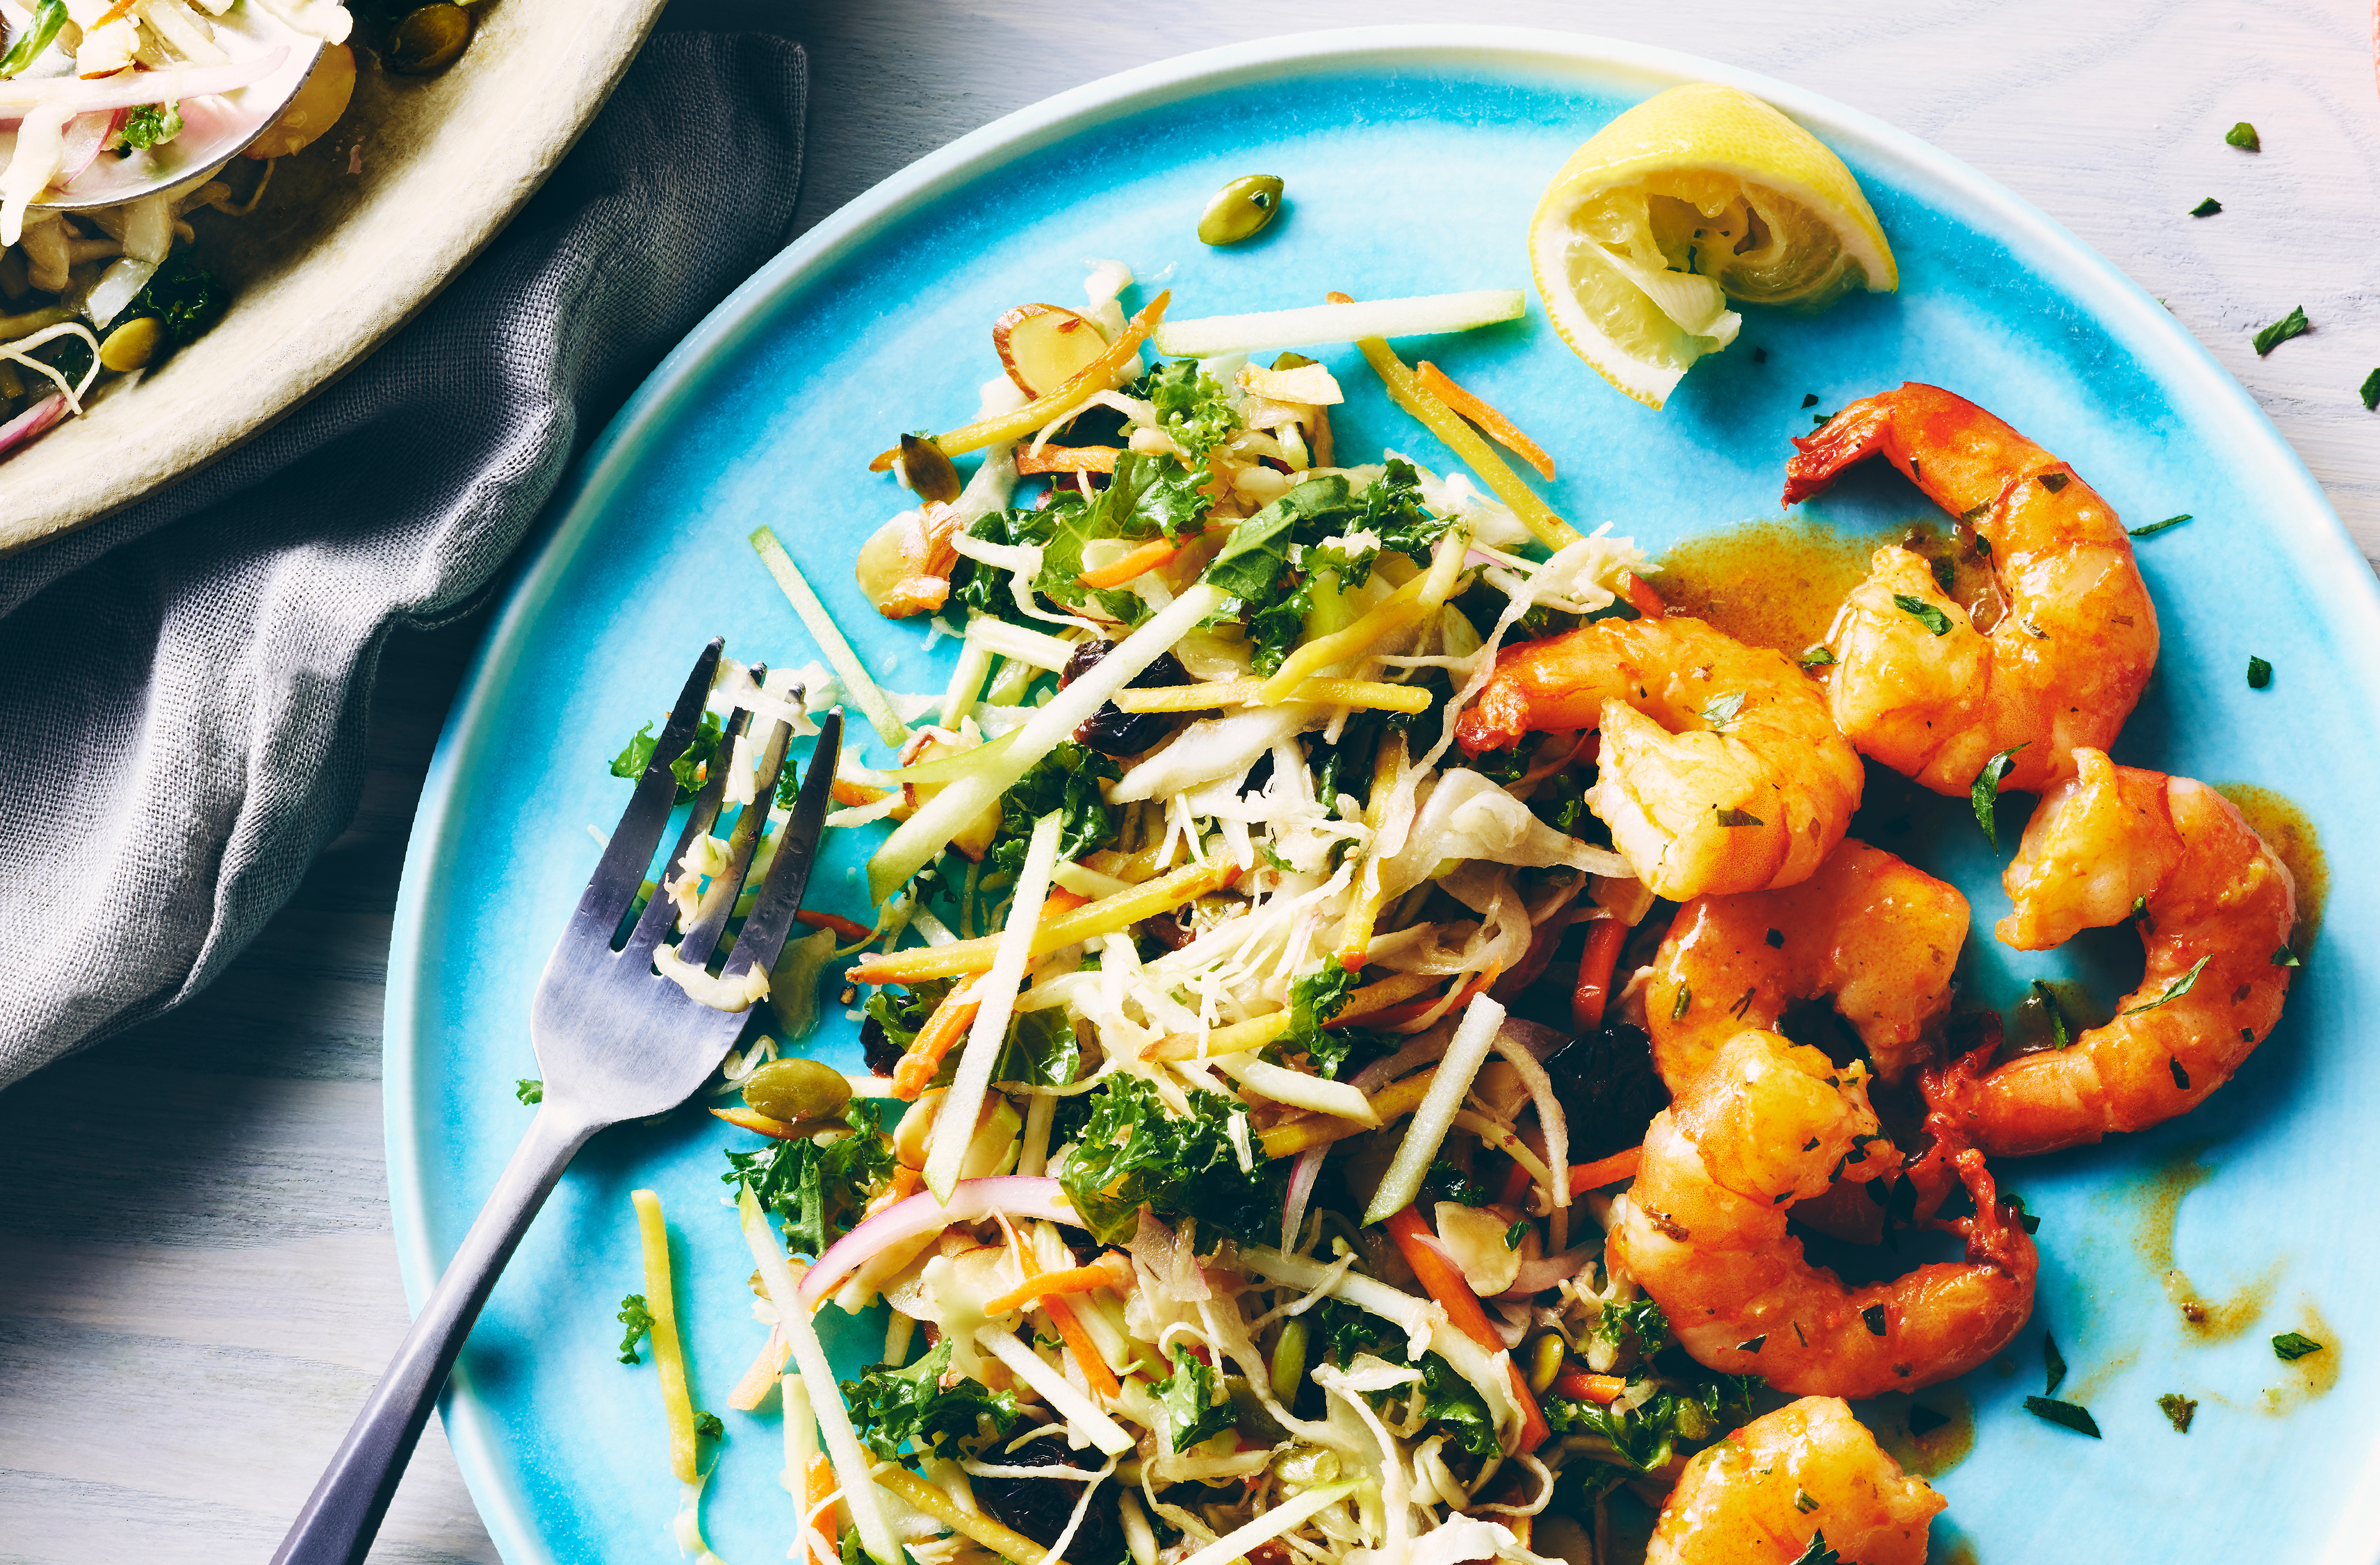 A coleslaw of golden beets, apple and herbs beside six shrimp on a plate